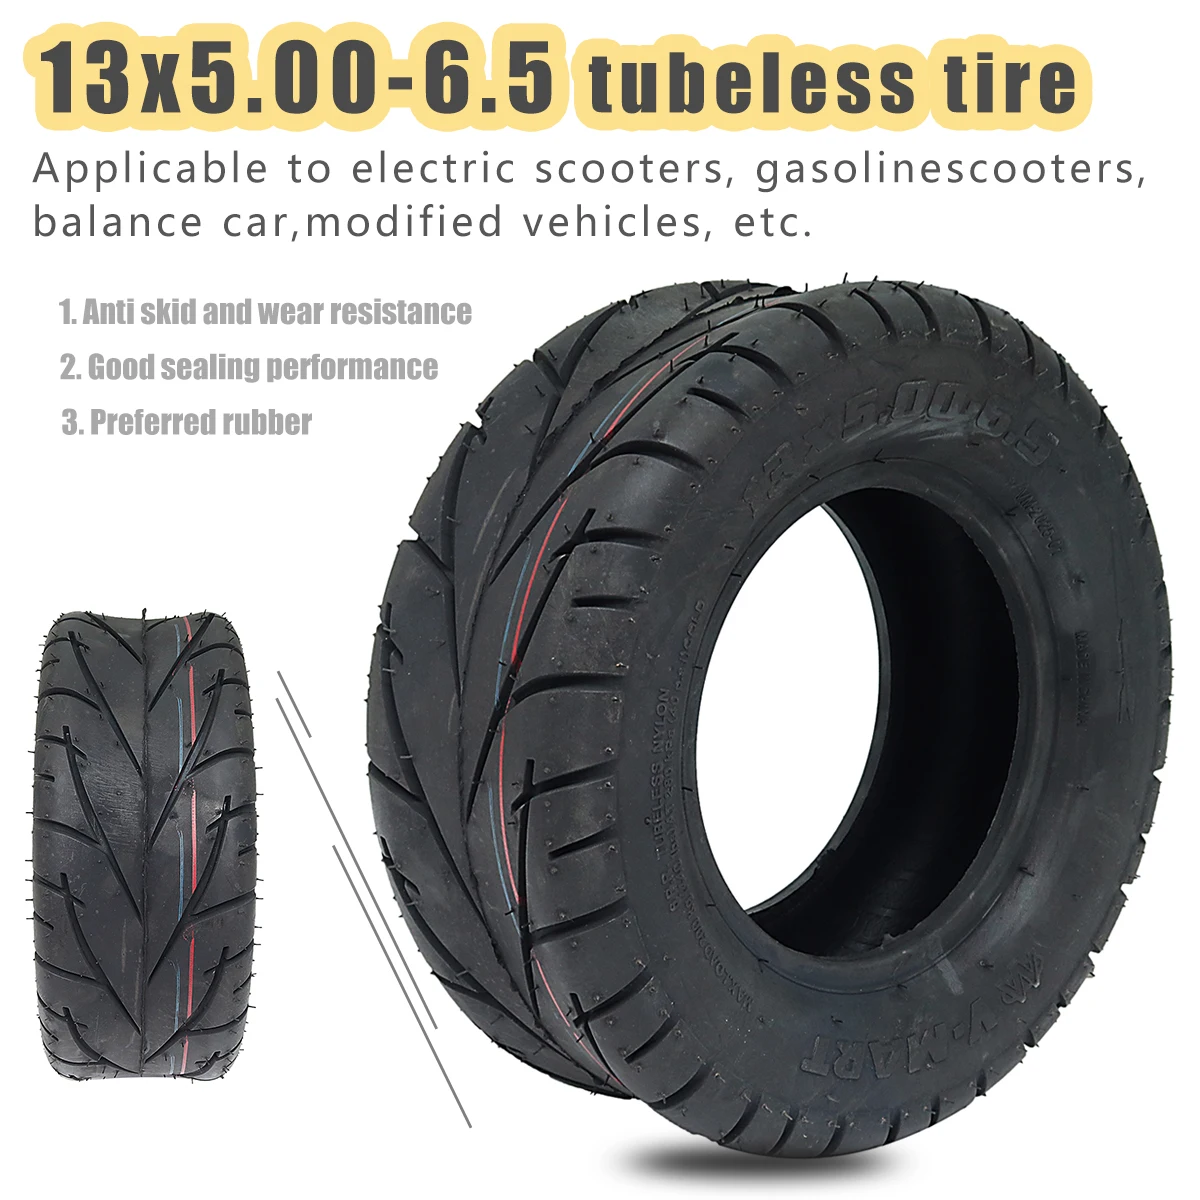 13 Inch Tubeless Tyre 13x5.00-6.5 for Go-Kart Scooters Motorcycle FLJ K6 Tire Vacuum Tire Wheel Scooter 13*5.00-6.5